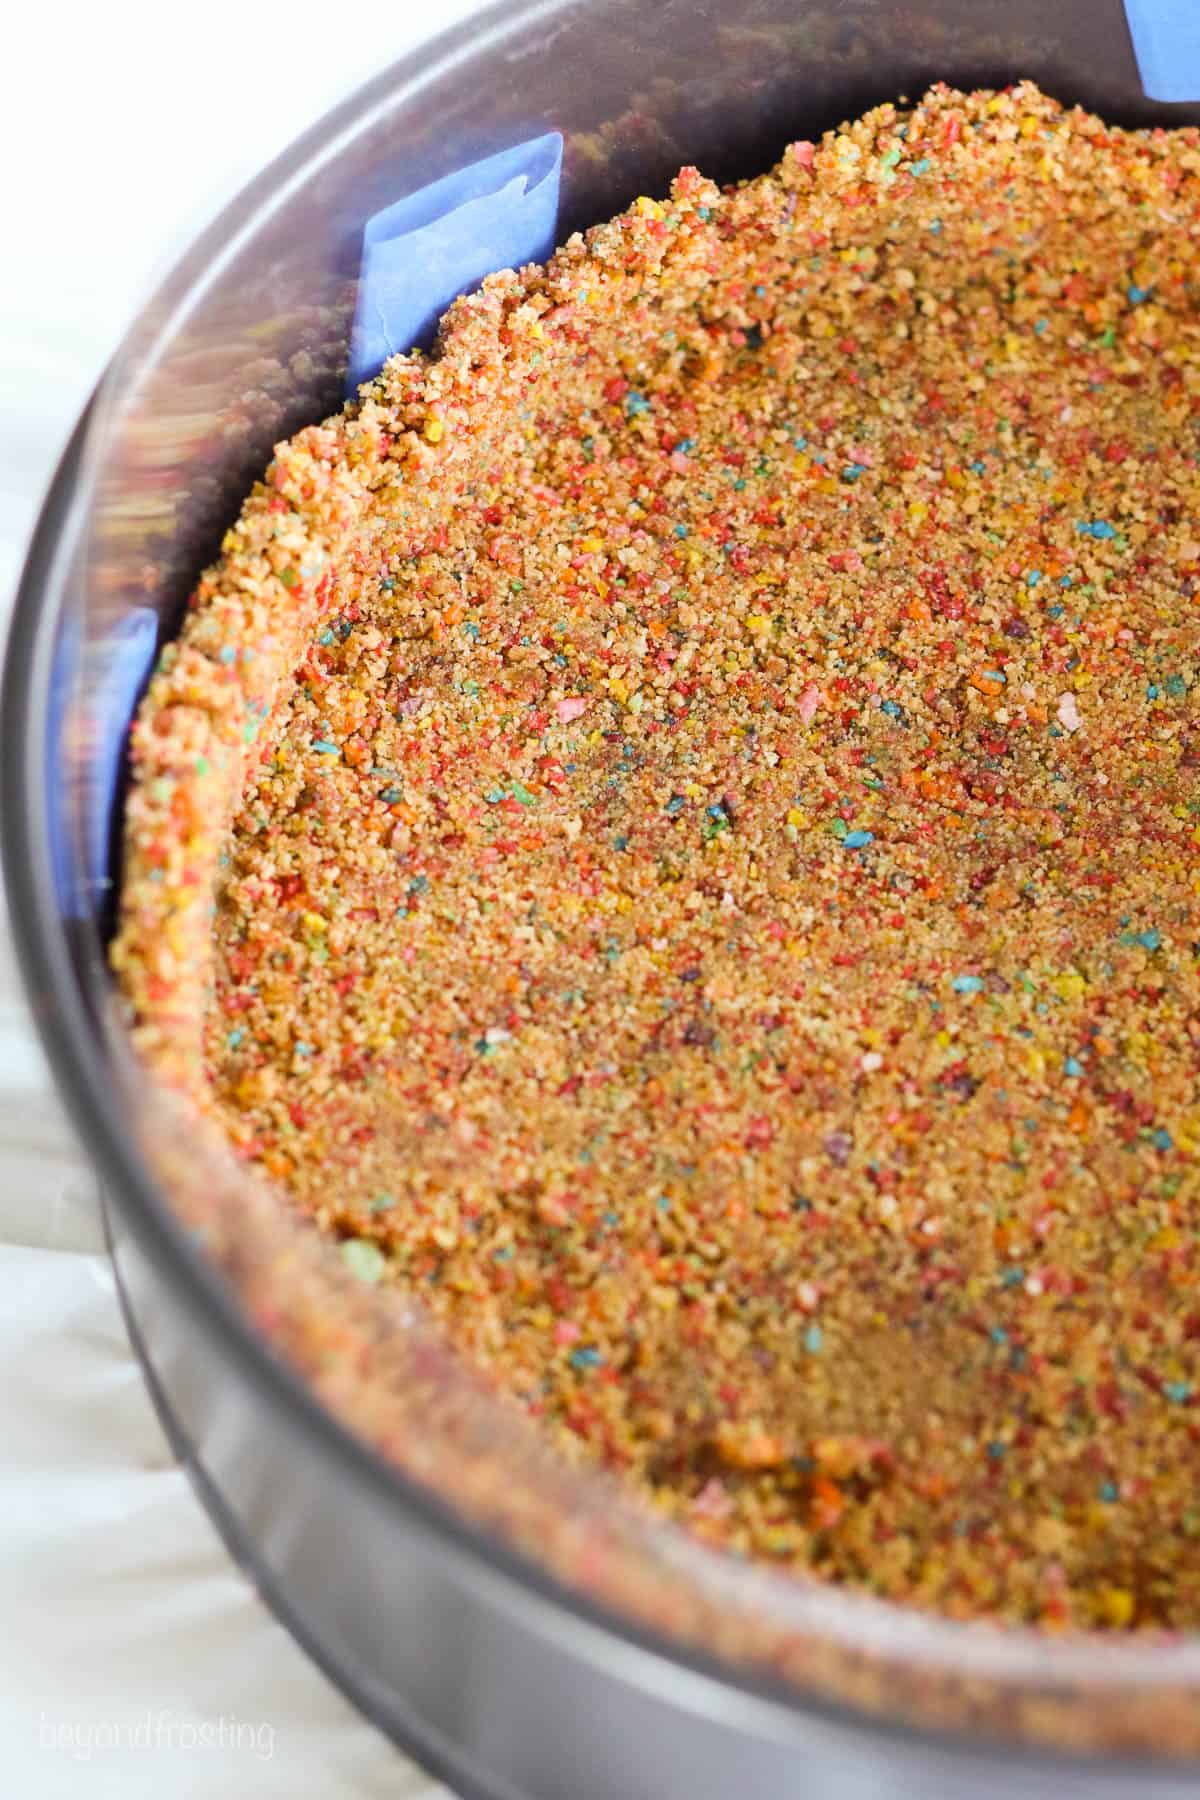 Fruity pebble crust pressed into a pan